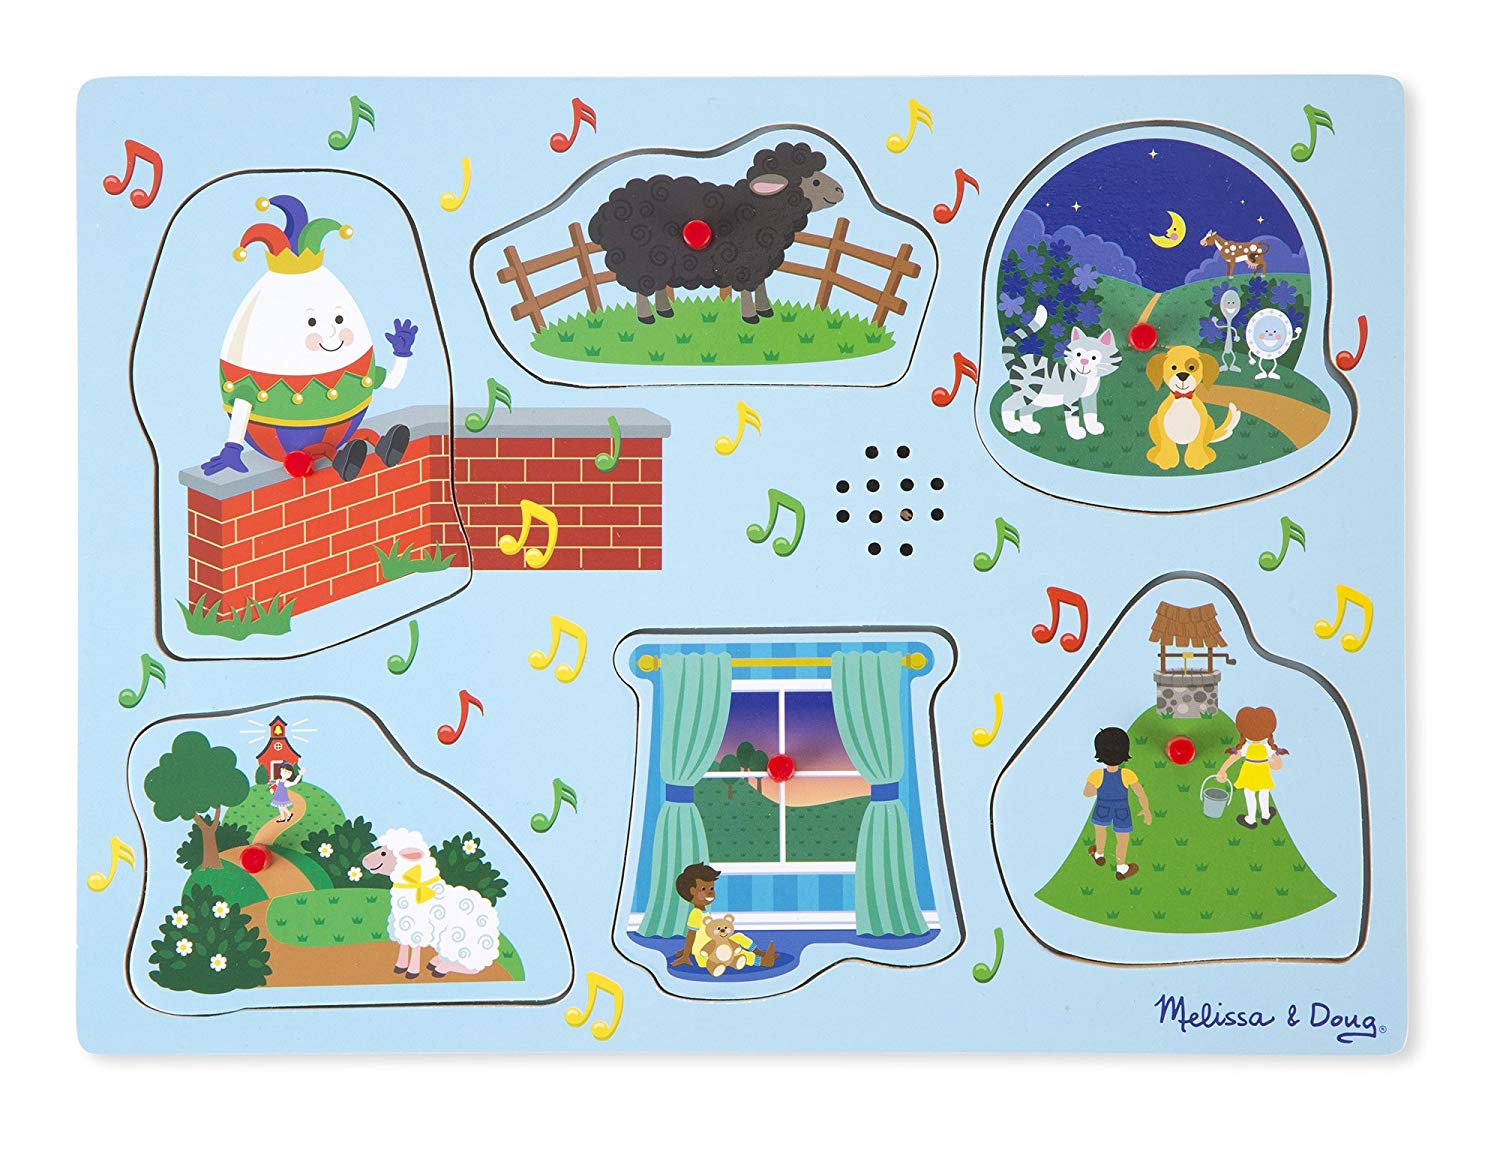 Melissa And Doug Nursery Rhymes 2 Track Puzzle (6 Pieces)